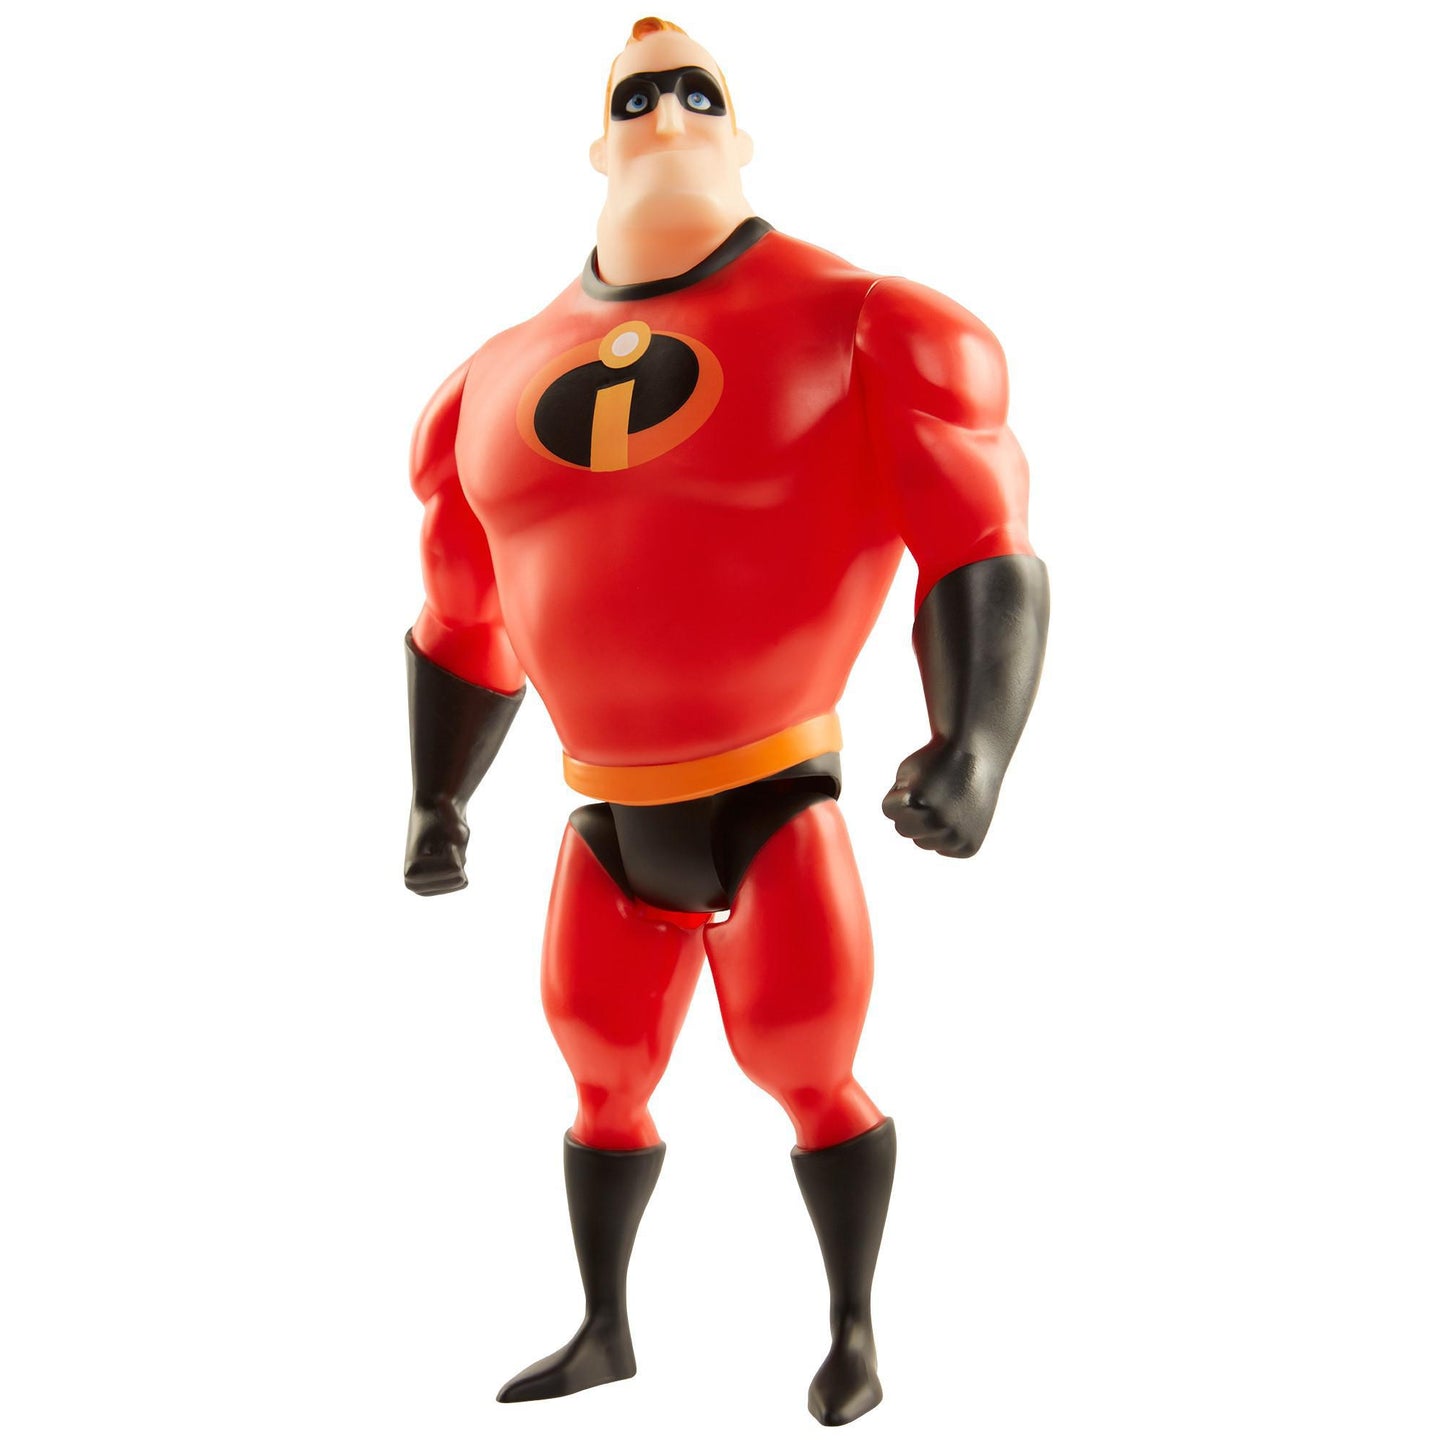 Incredibles 2 Champion Series 12" Action Figure - Mr. Incredible